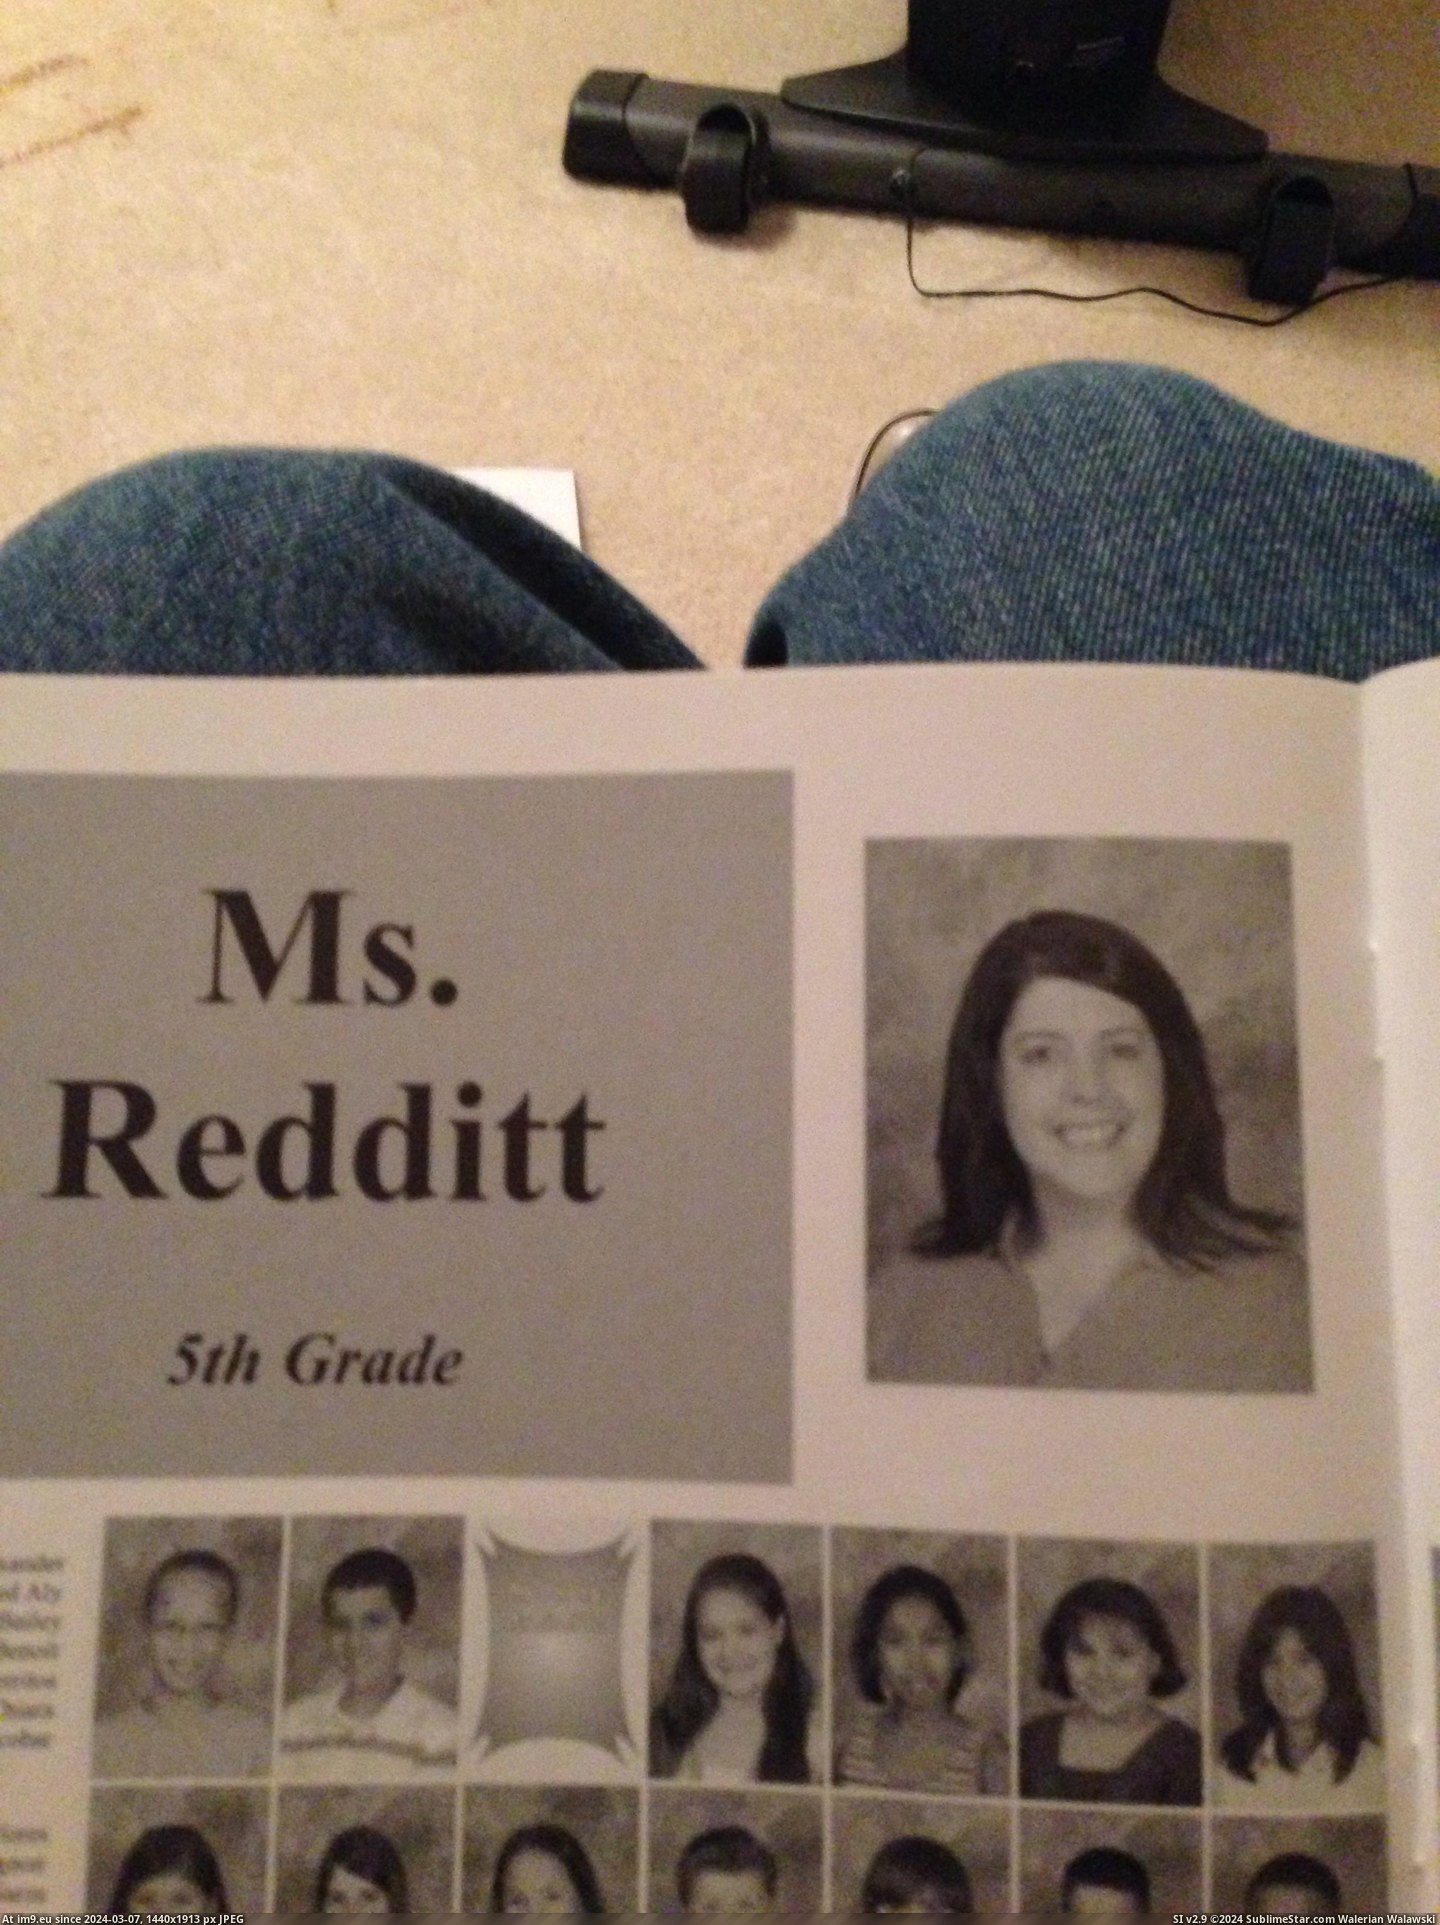 #Was #Teacher #Elementary #Noticed #Yearbook [Pics] I was going through my elementary yearbook when I noticed this teacher. Pic. (Изображение из альбом My r/PICS favs))